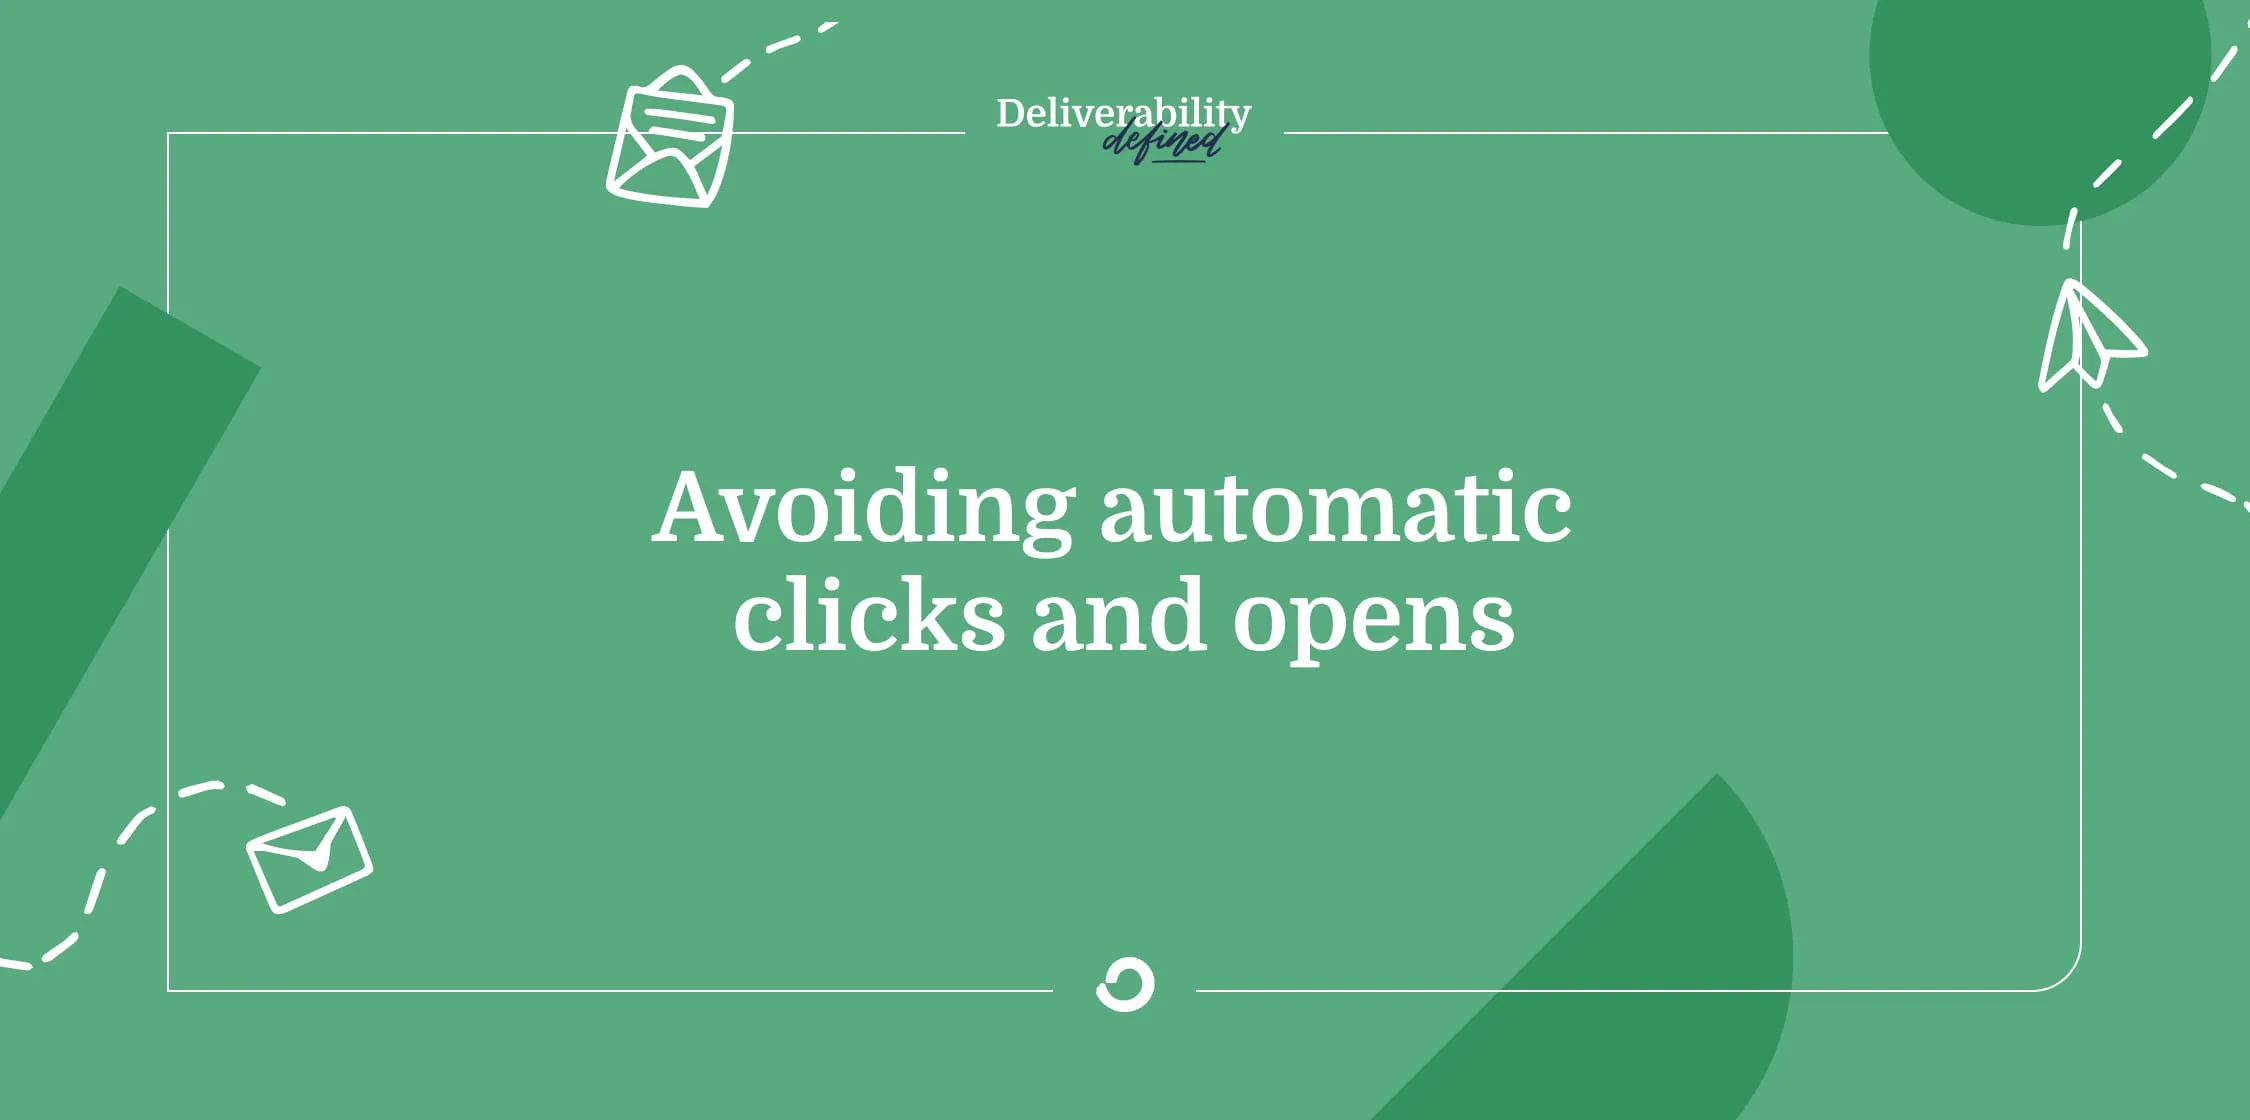 How to avoid automatic clicks and opens from skewing your metrics